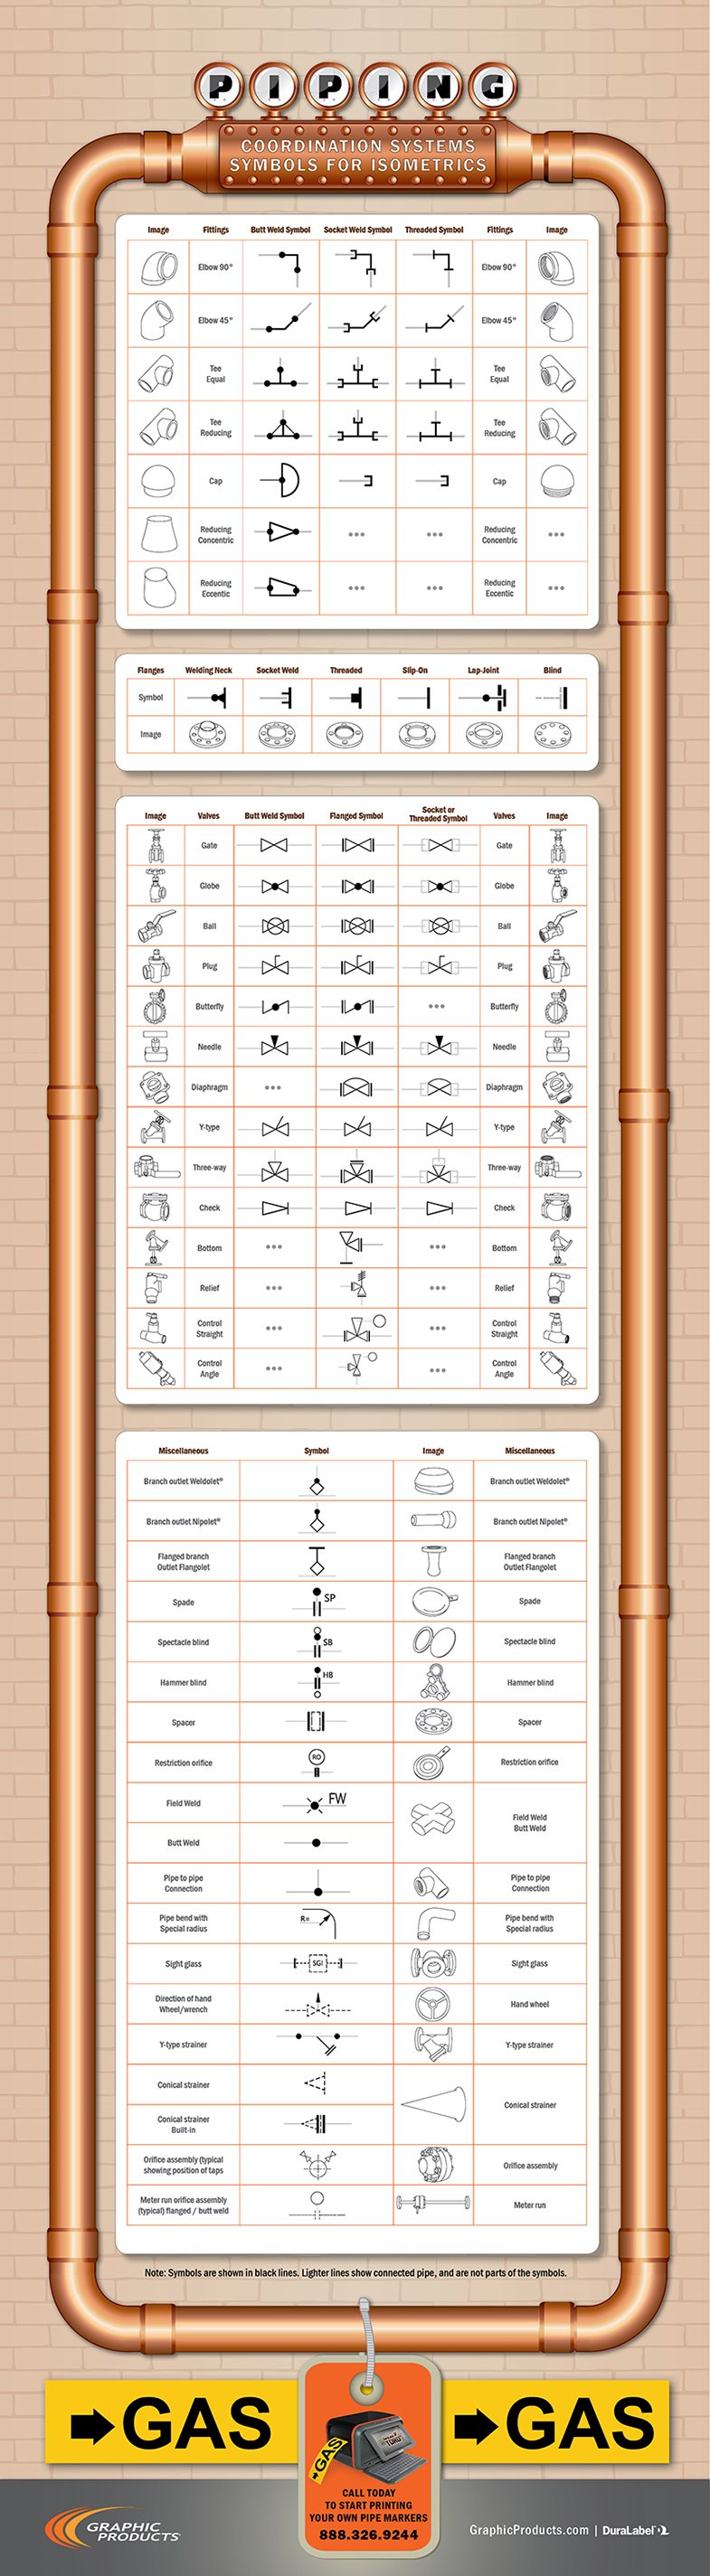 pipe-fittings-infographic